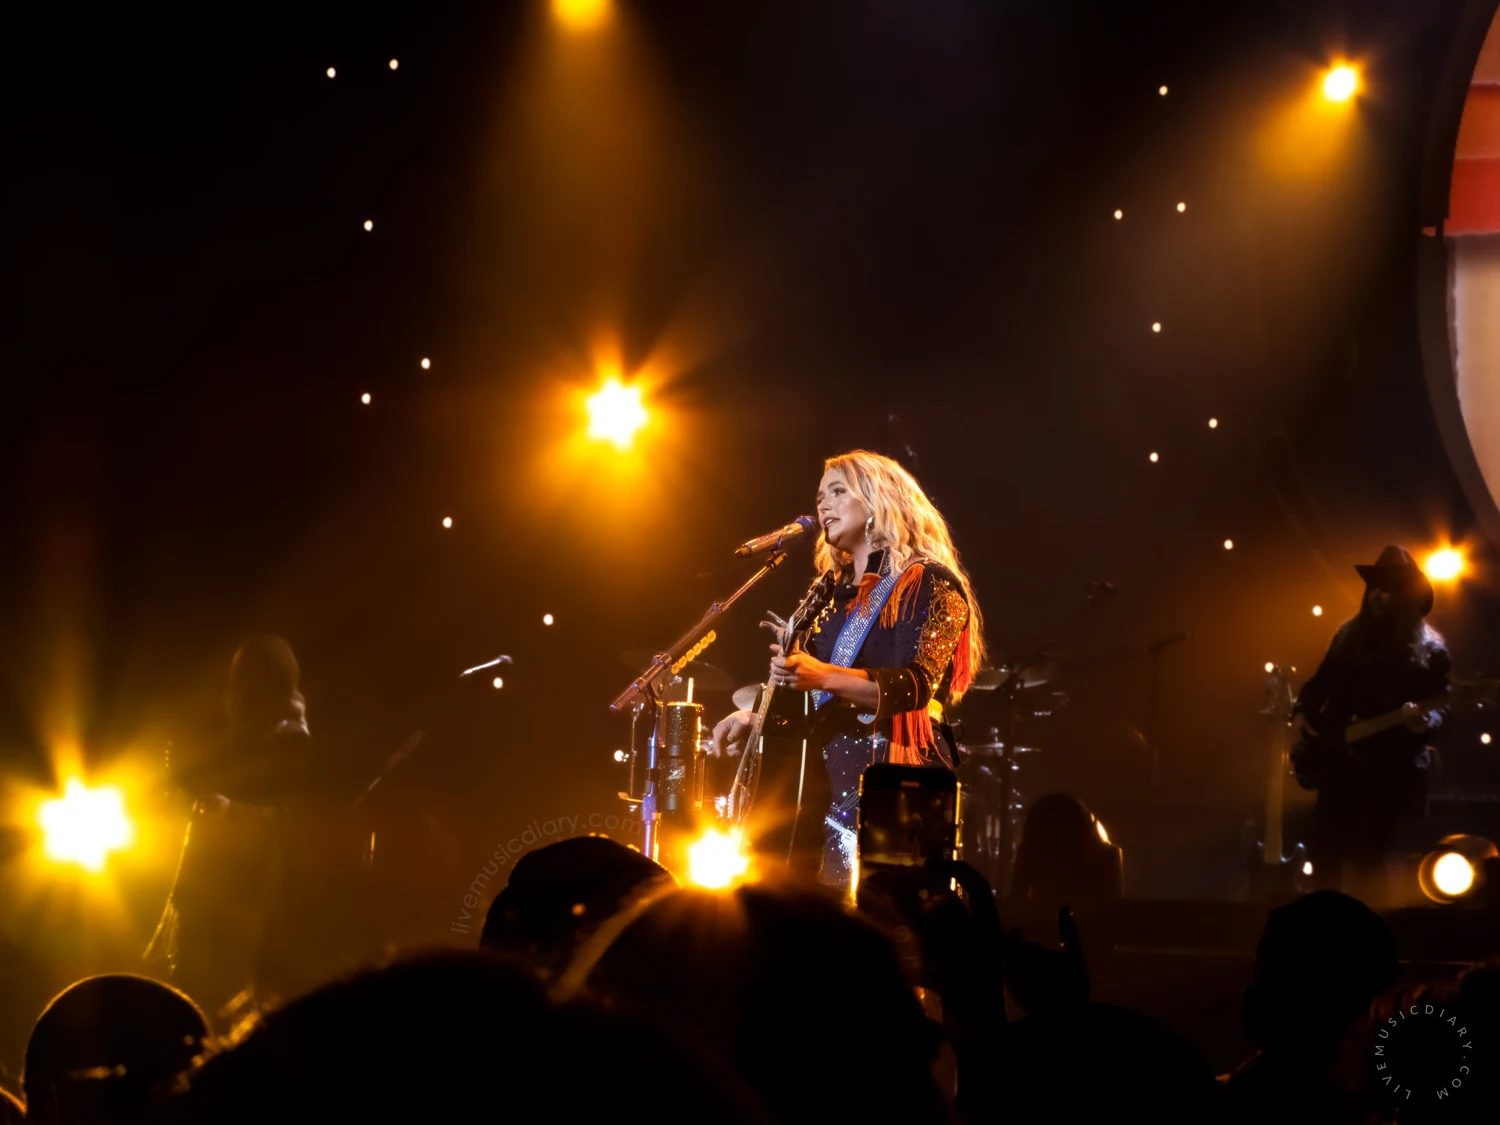 Miranda lambert on stage at a distance during her Velvet Rodeo Las Vegas Residency, with the audience in the foreground. 4/2/2023 | Photo by Miranda Mendelson, LiveMusicDiary.com